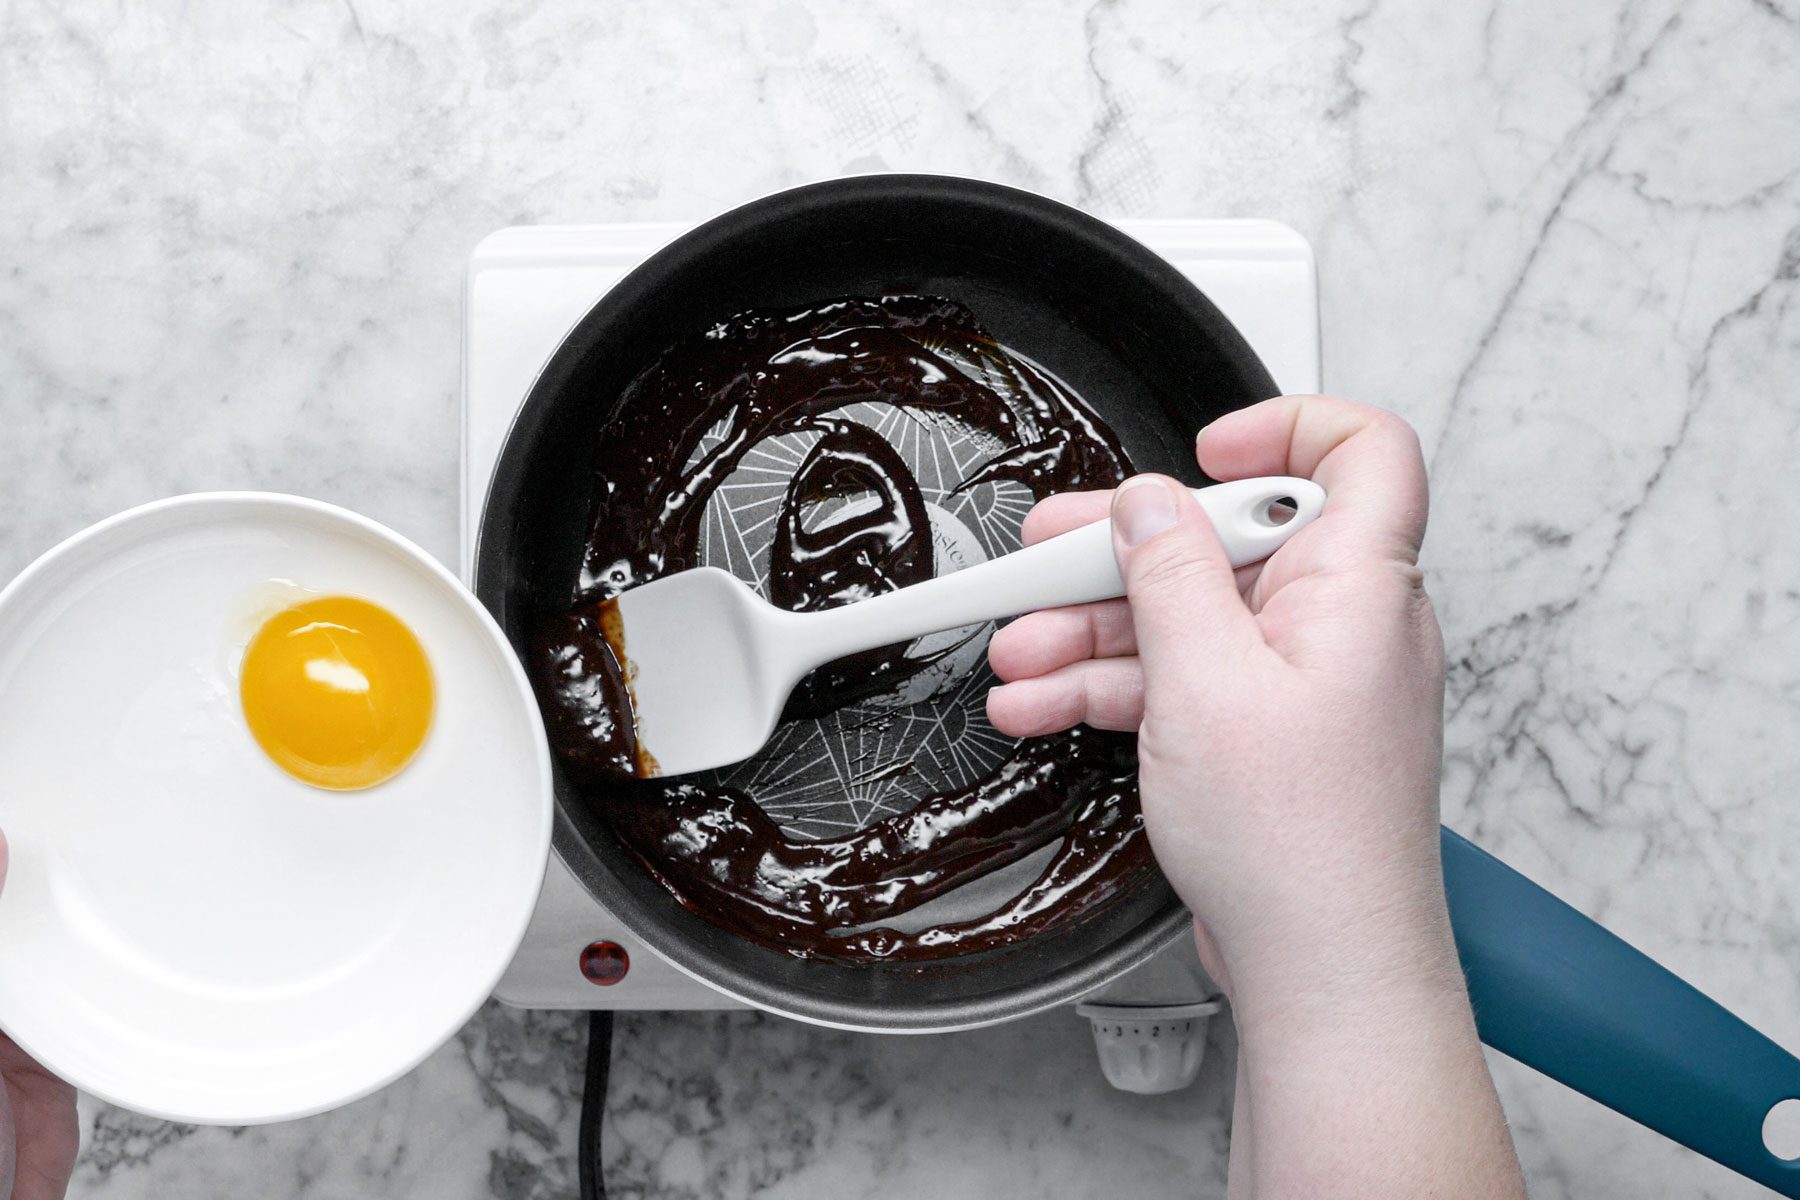 Melting the chocolate in a large pan while holding egg yolk in a plate